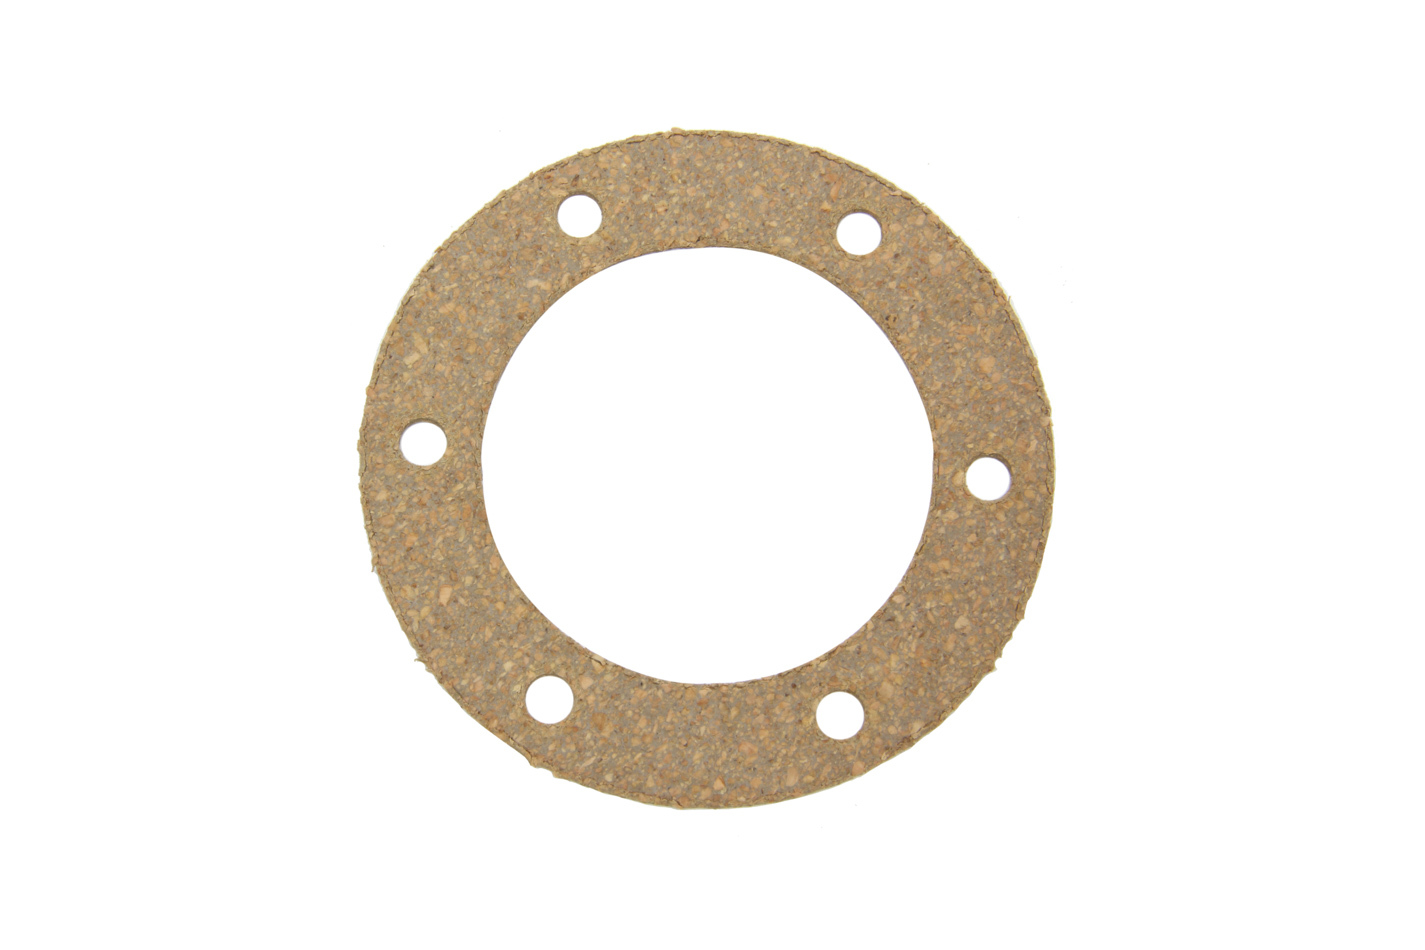 Fuel Safe 1GAS75 Fuel Cell Fill Plate Gasket, 6-Bolt, 2-15/16 in Oval, 0.062 in Thick, Cork, Fuel Safe Fuel Cells, Each